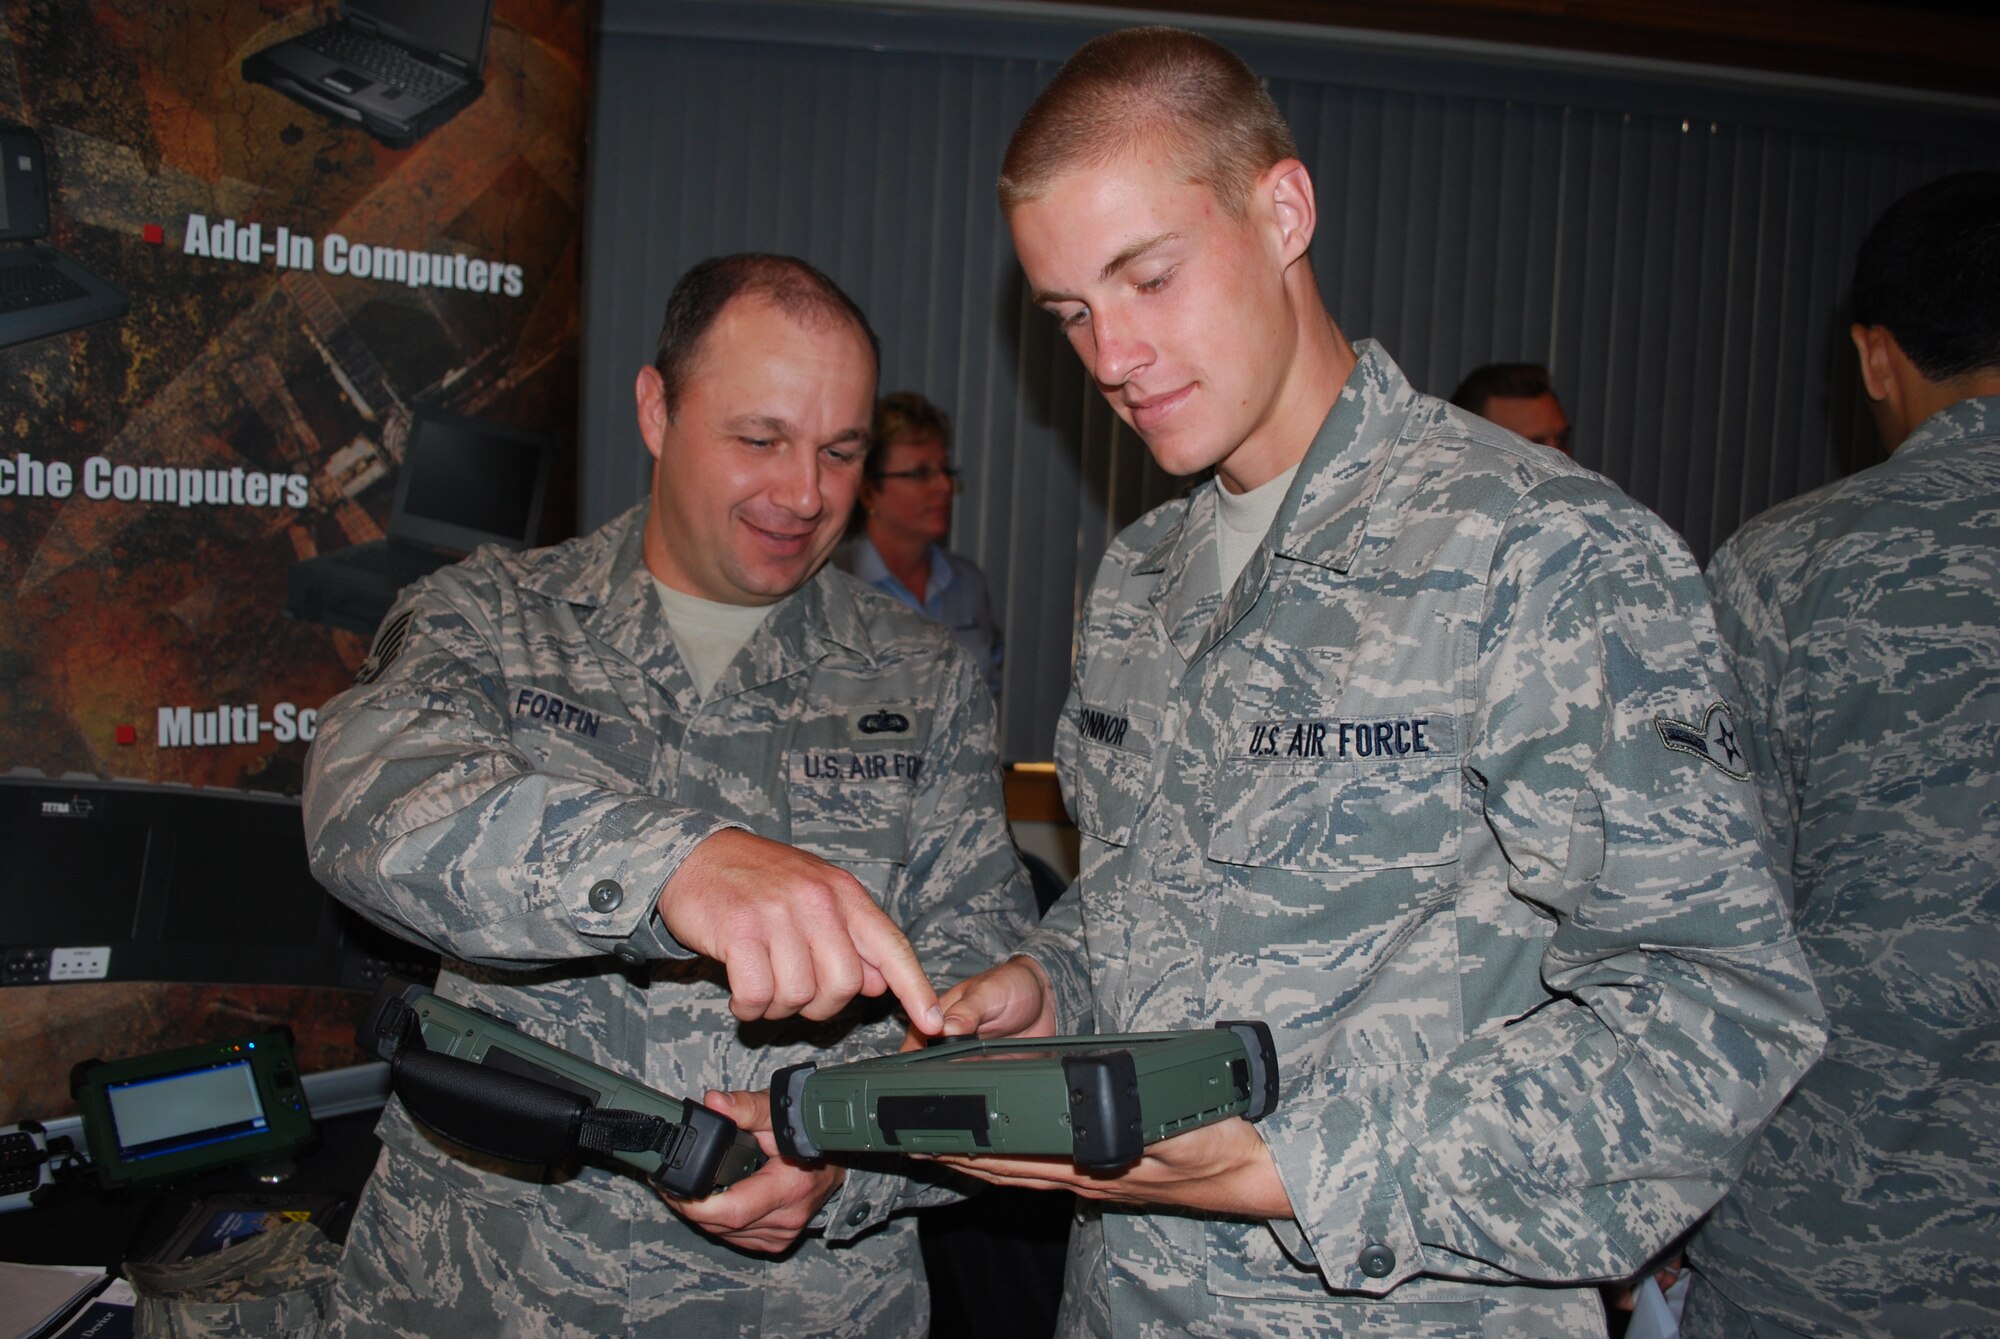 Tech. Sgt. Tod Fortin and Airman Michael O'Connor of the Air Force Technical Applications Center compare field computers at the Patrick Air Force Base Technology Expo April 21 at The Tides. Organized by the Cape Canaveral Chapter of the Armed Forces Communications and Electronics Association, approximately 25 vendors turned out to showcase their wares. (U.S. Air Force photo/Senior Airman David Dobrydney)